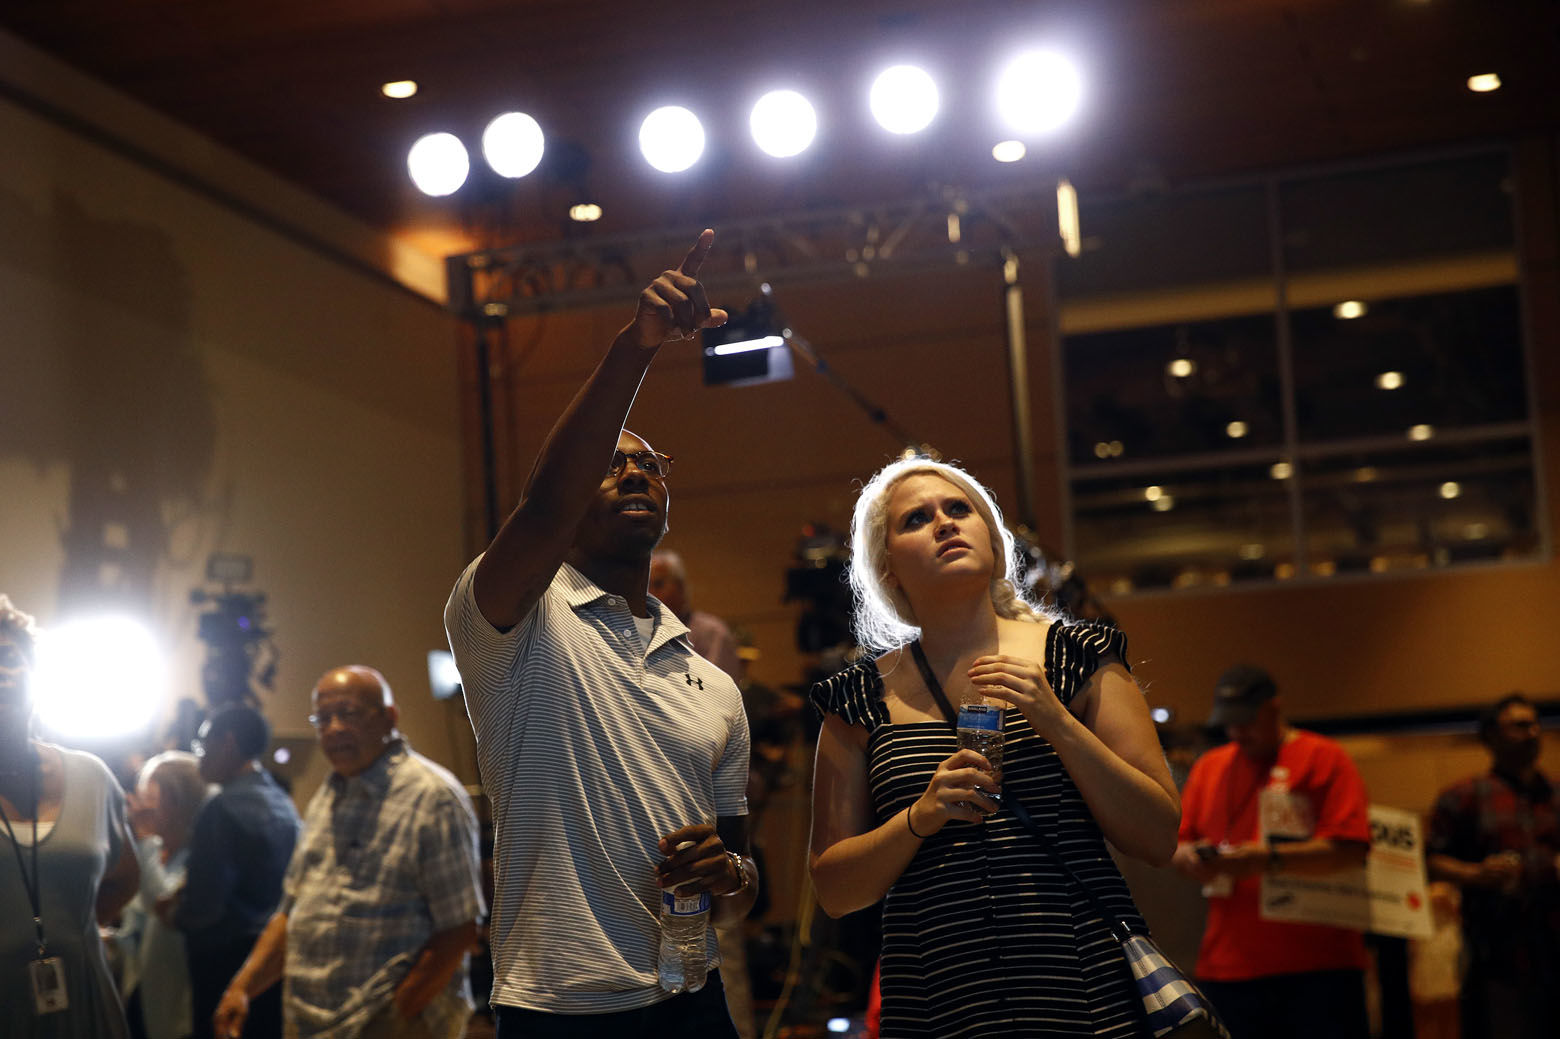 Dallas Matthews, left, and Tabitha Jackson, supporters of Maryland Democratic gubernatorial candidate Ben Jealous, watch voting results during an election night party, Tuesday, June 26, 2018, in Baltimore. Jealous and Prince George's County Executive Rushern Baker lead a crowded Democratic primary field to win a nomination to face popular Republican Gov. Larry Hogan in the fall. (AP Photo/Patrick Semansky)